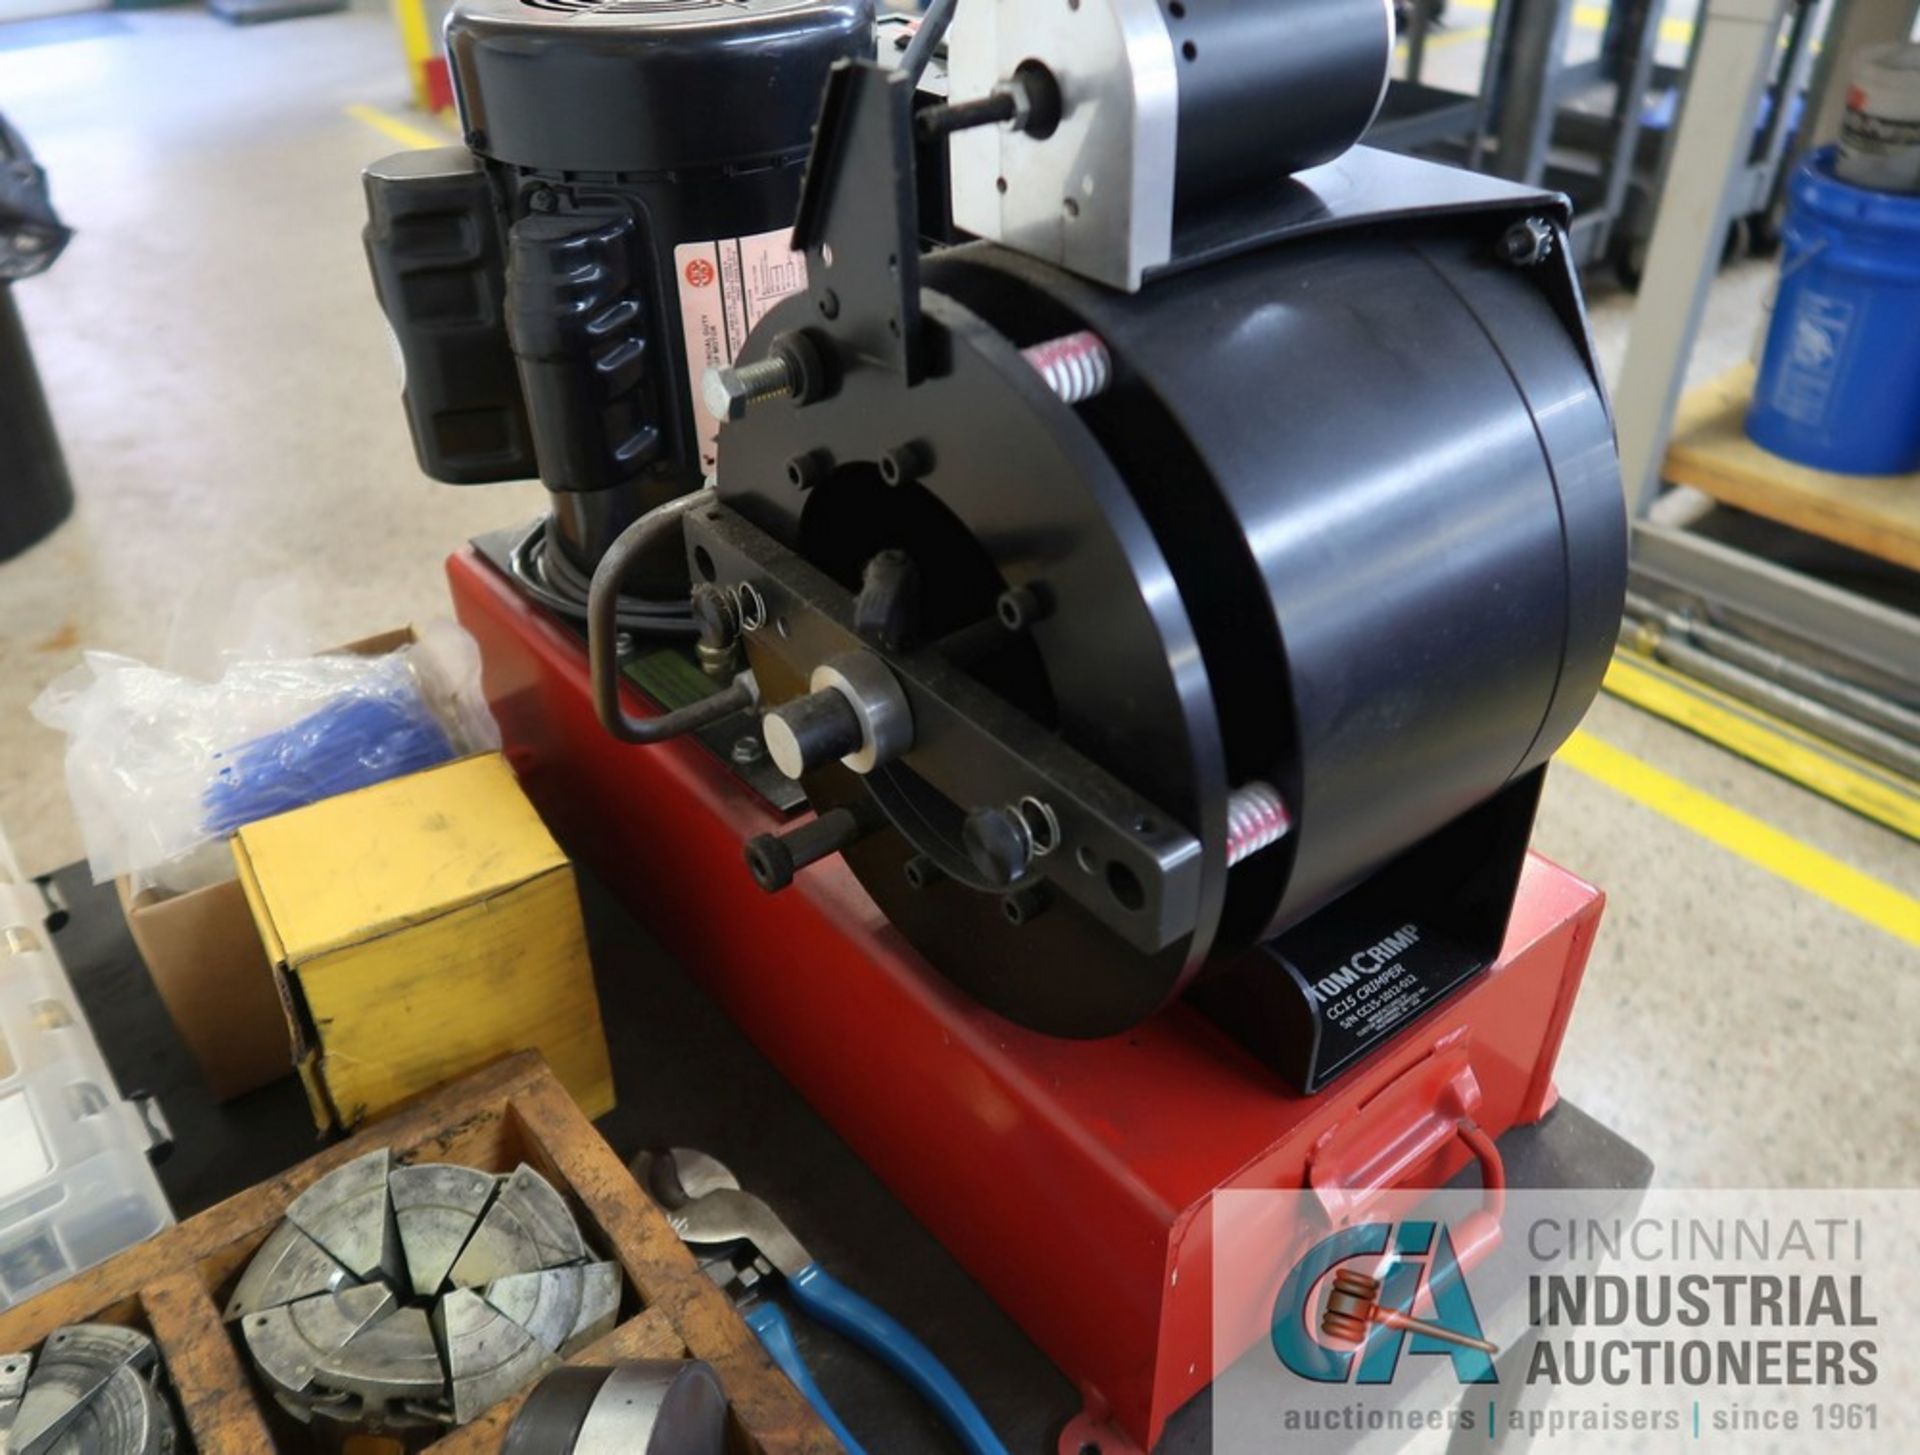 CUSTOM CRIMP MODEL CC15 HYDRAULIC HOSE CRIMPER; S/N CC15-1012-012, WITH (3) DIES, HOSE AND BENCH - Image 4 of 6